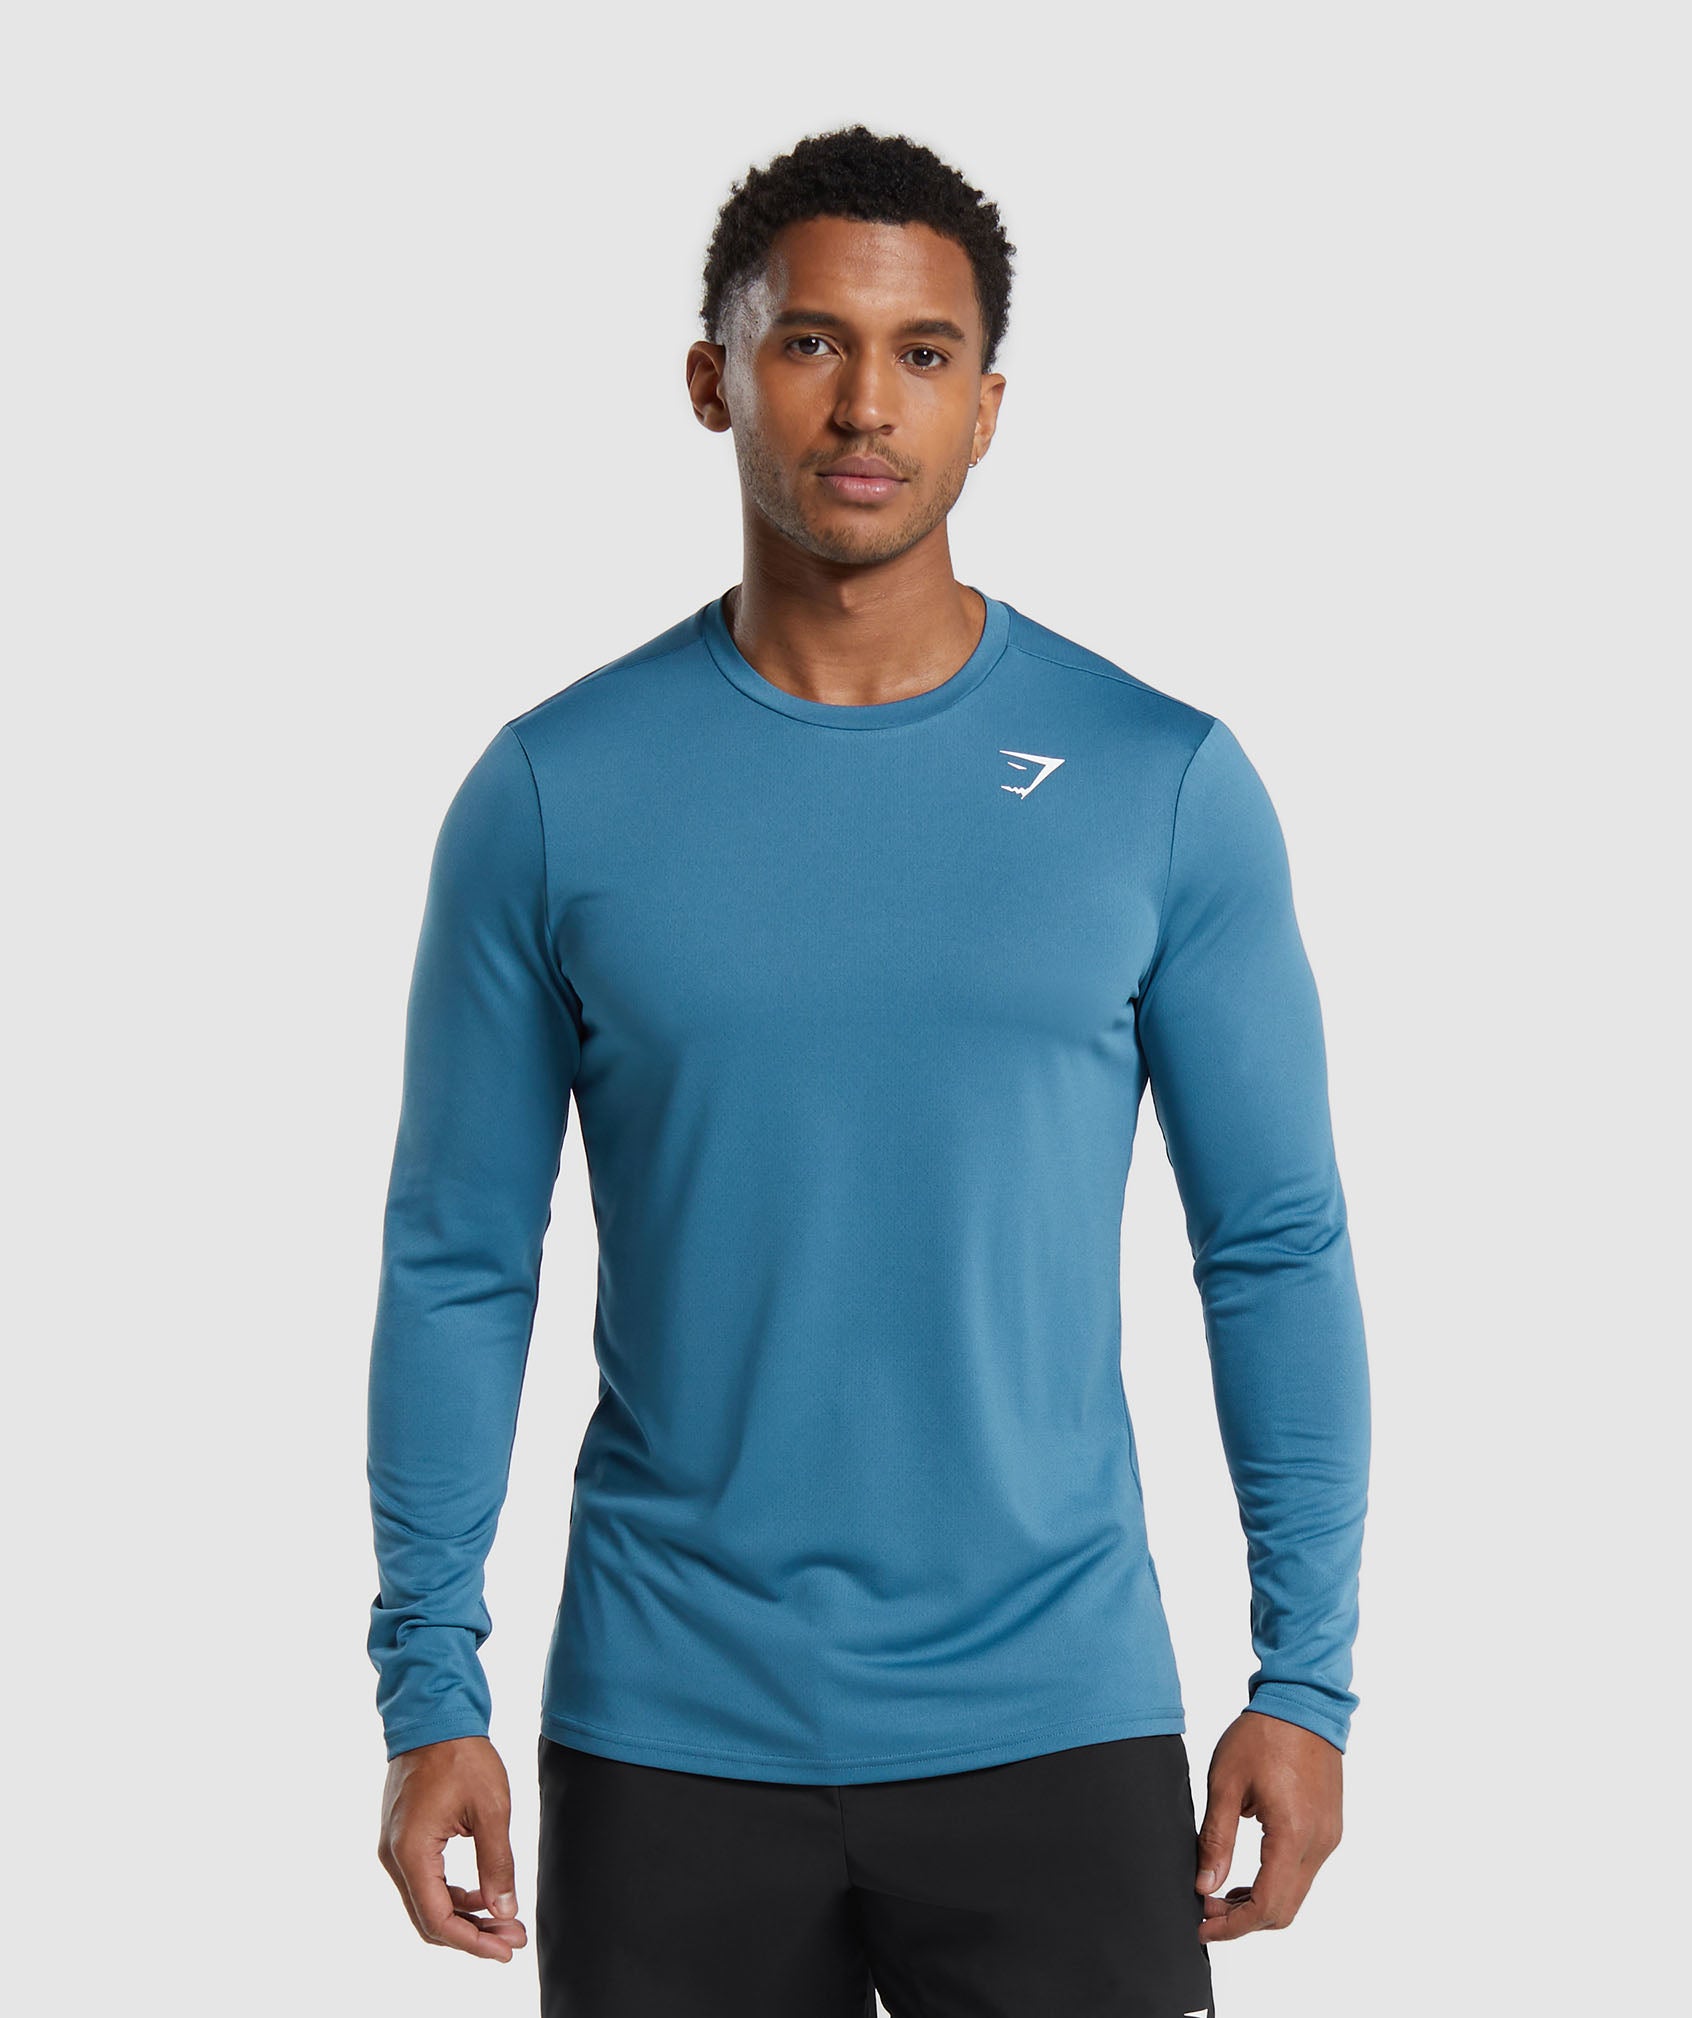 Arrival Long Sleeve T-Shirt in Utility Blue - view 1